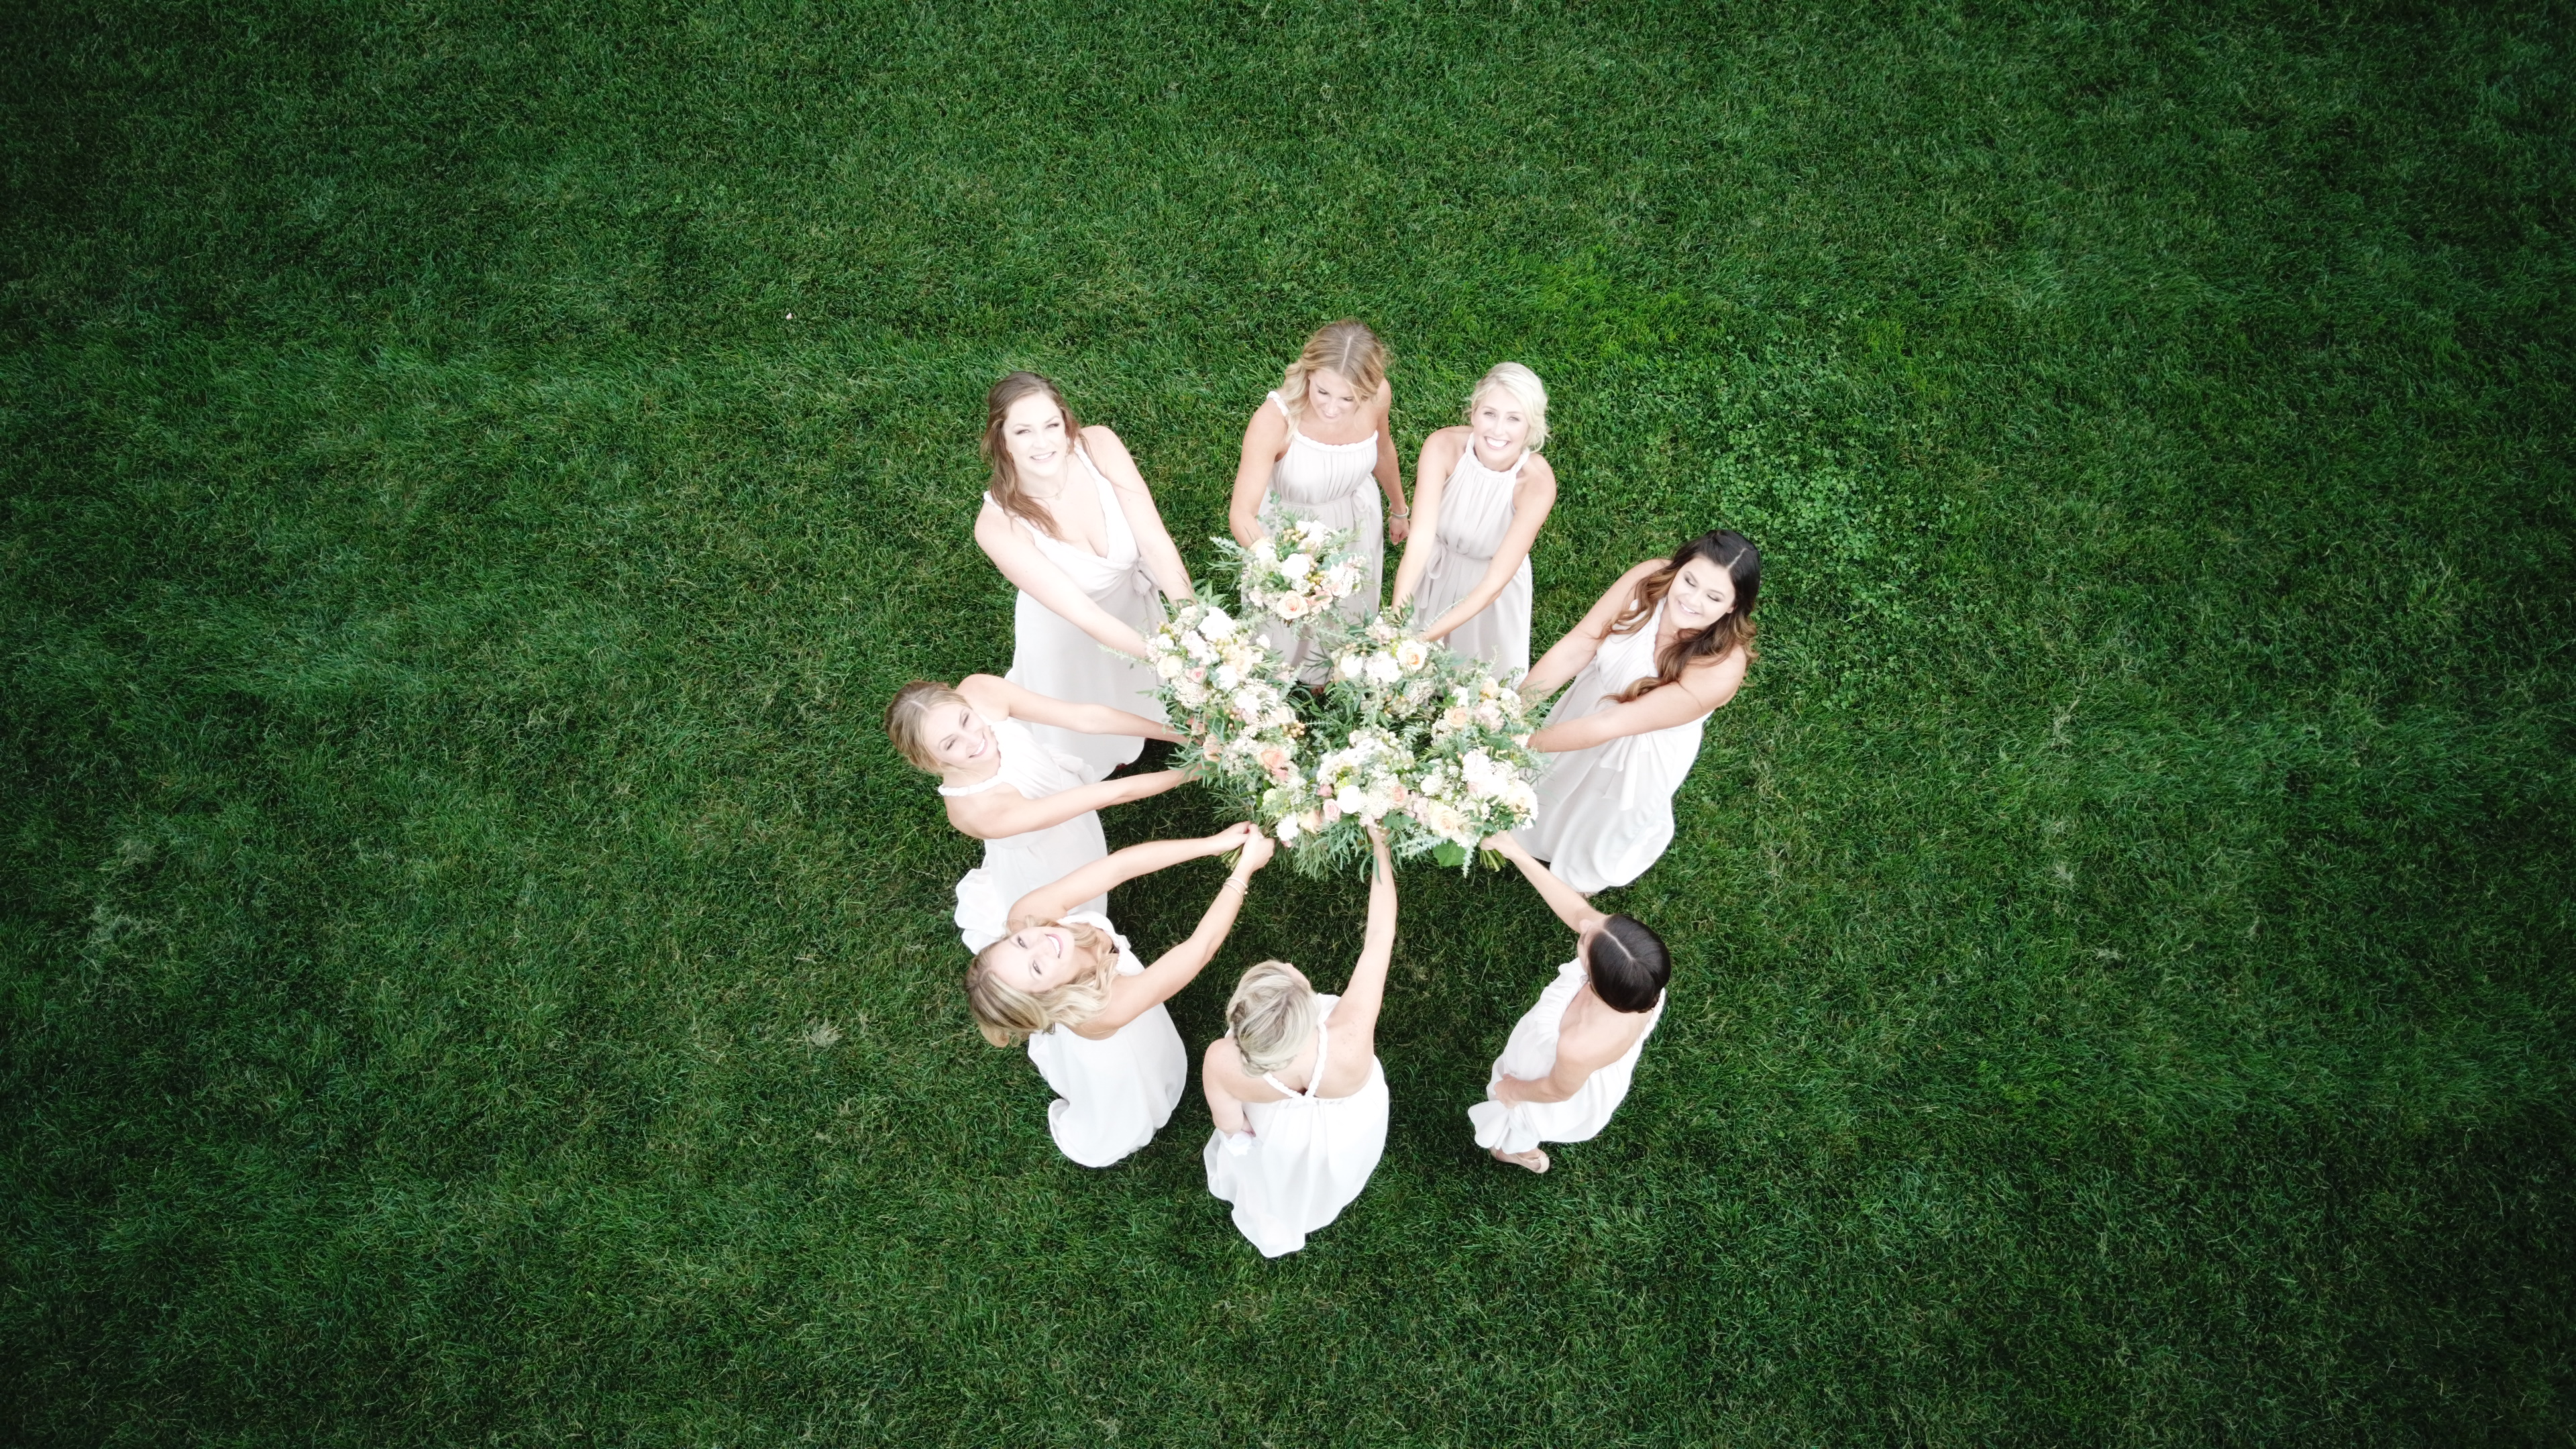 Drone Photo of Bridemaids